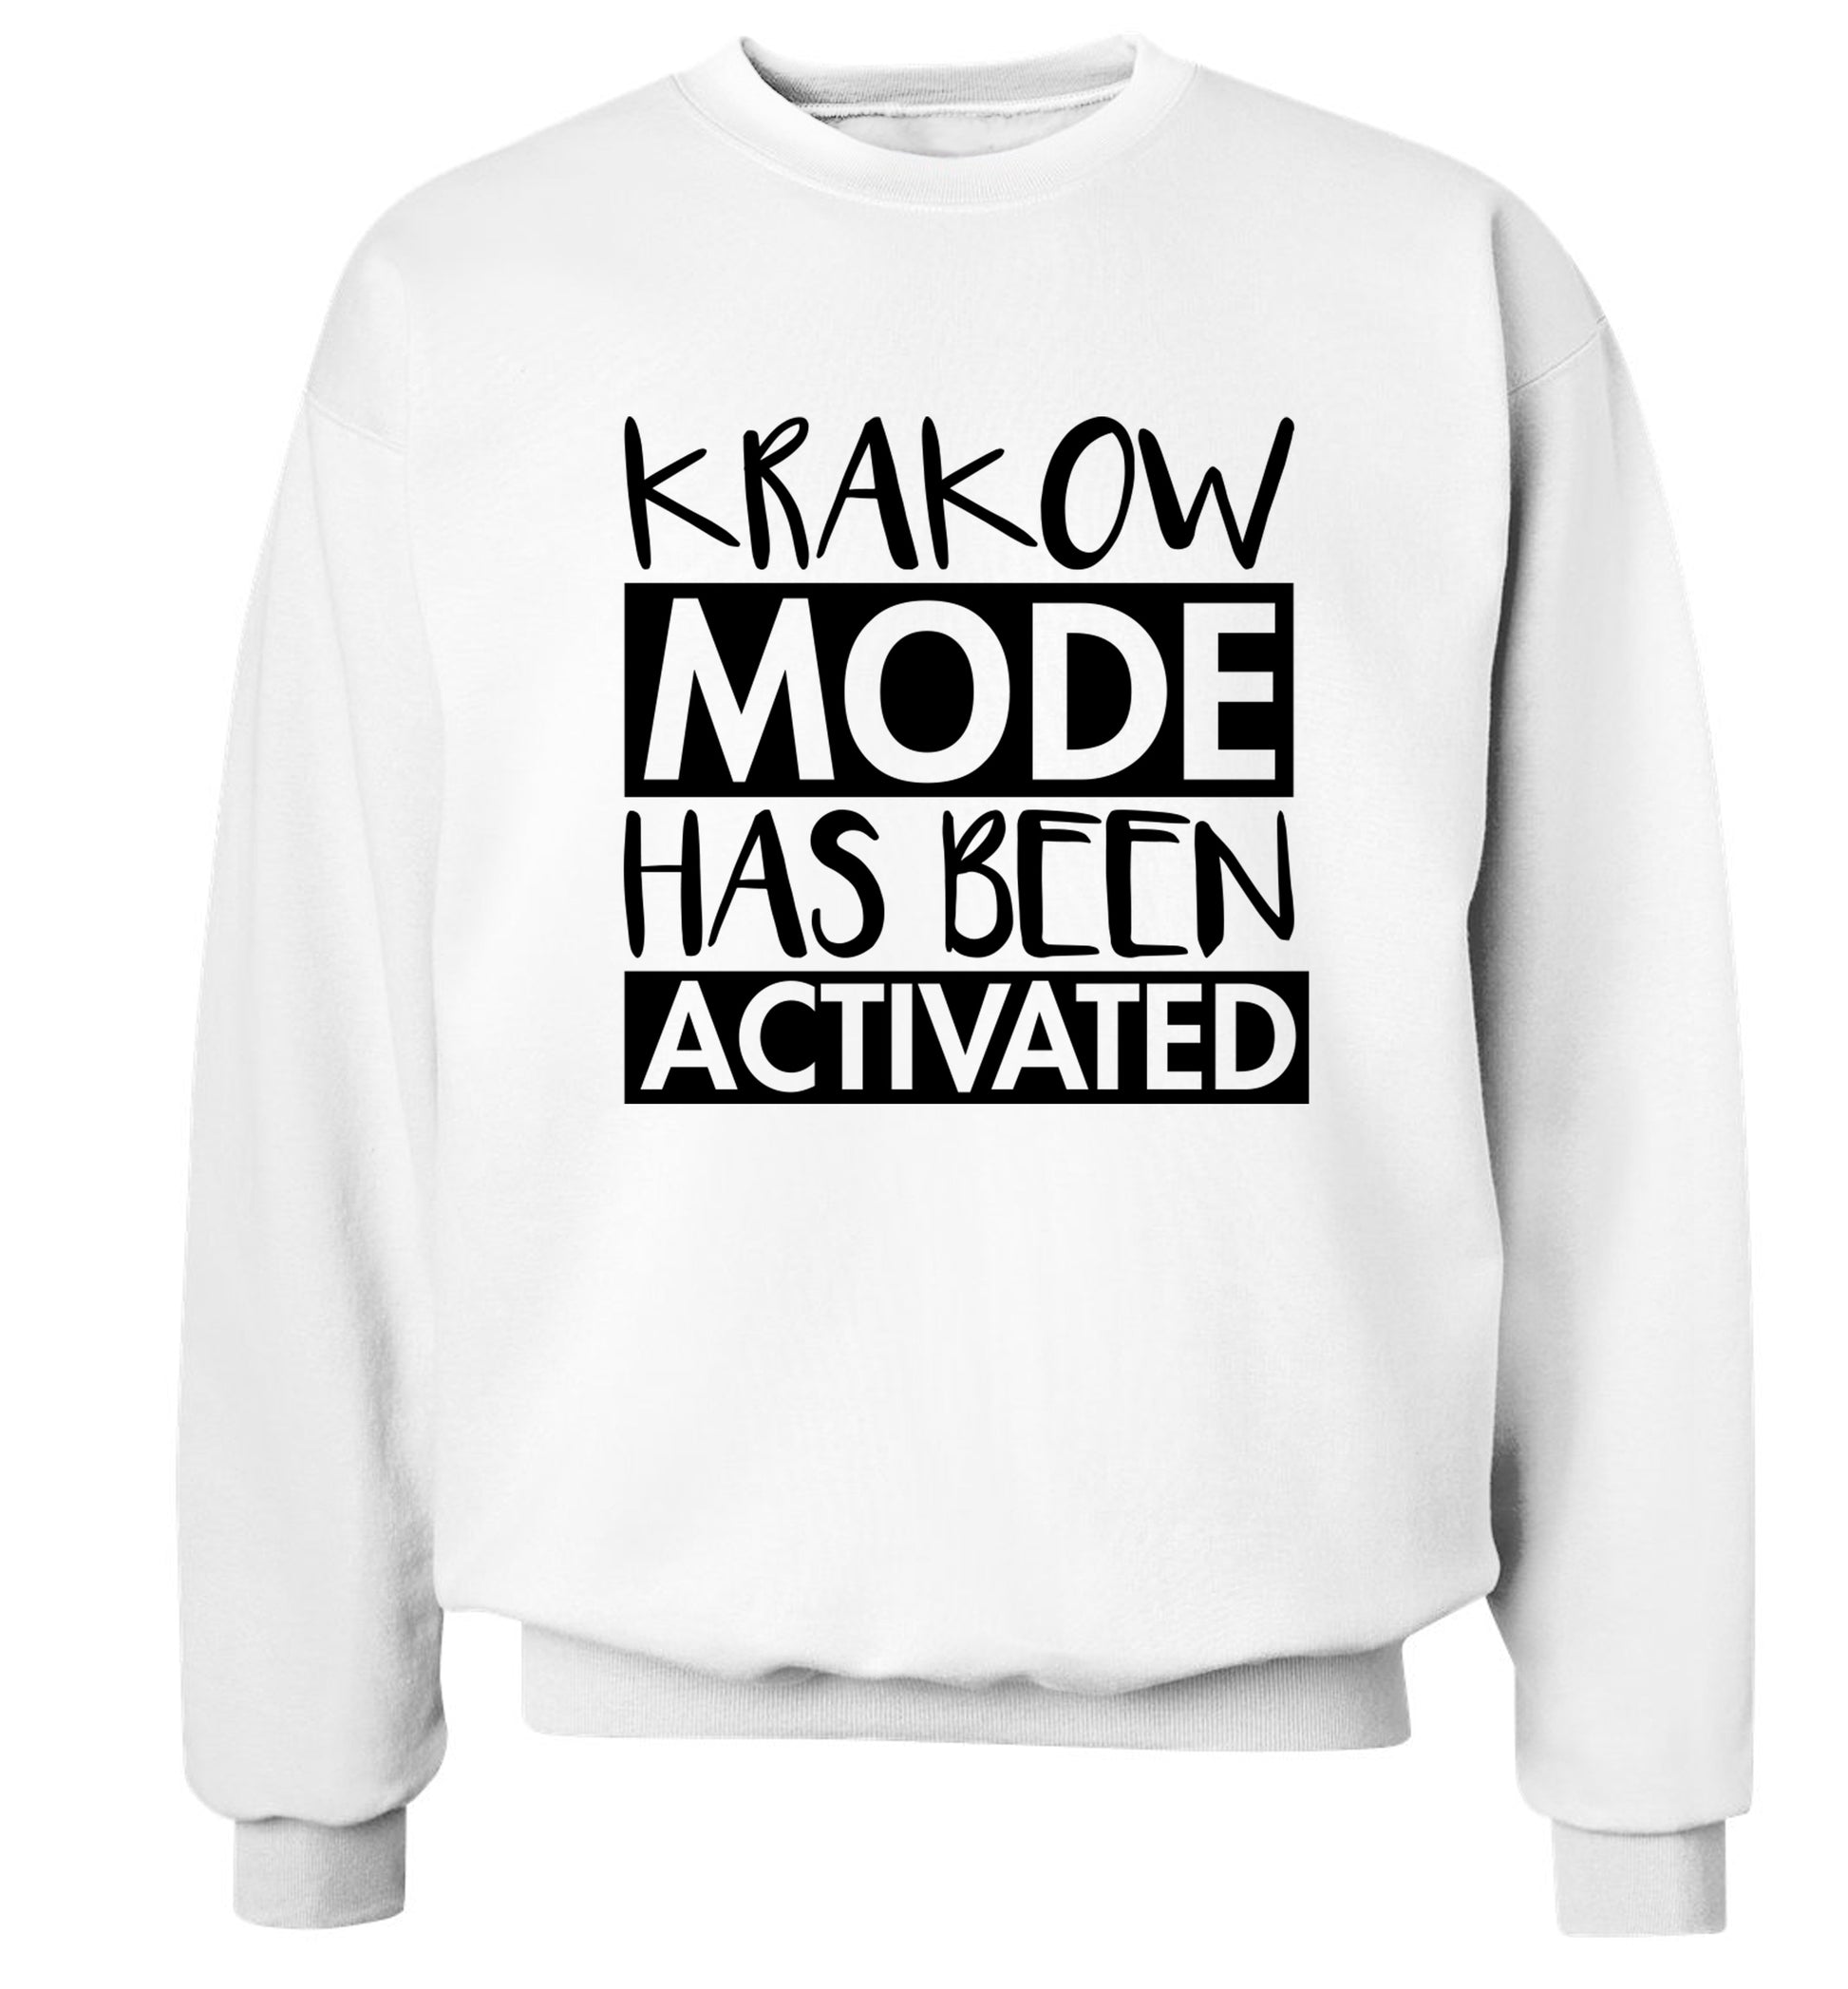 Krakow mode has been activated Adult's unisex white Sweater 2XL